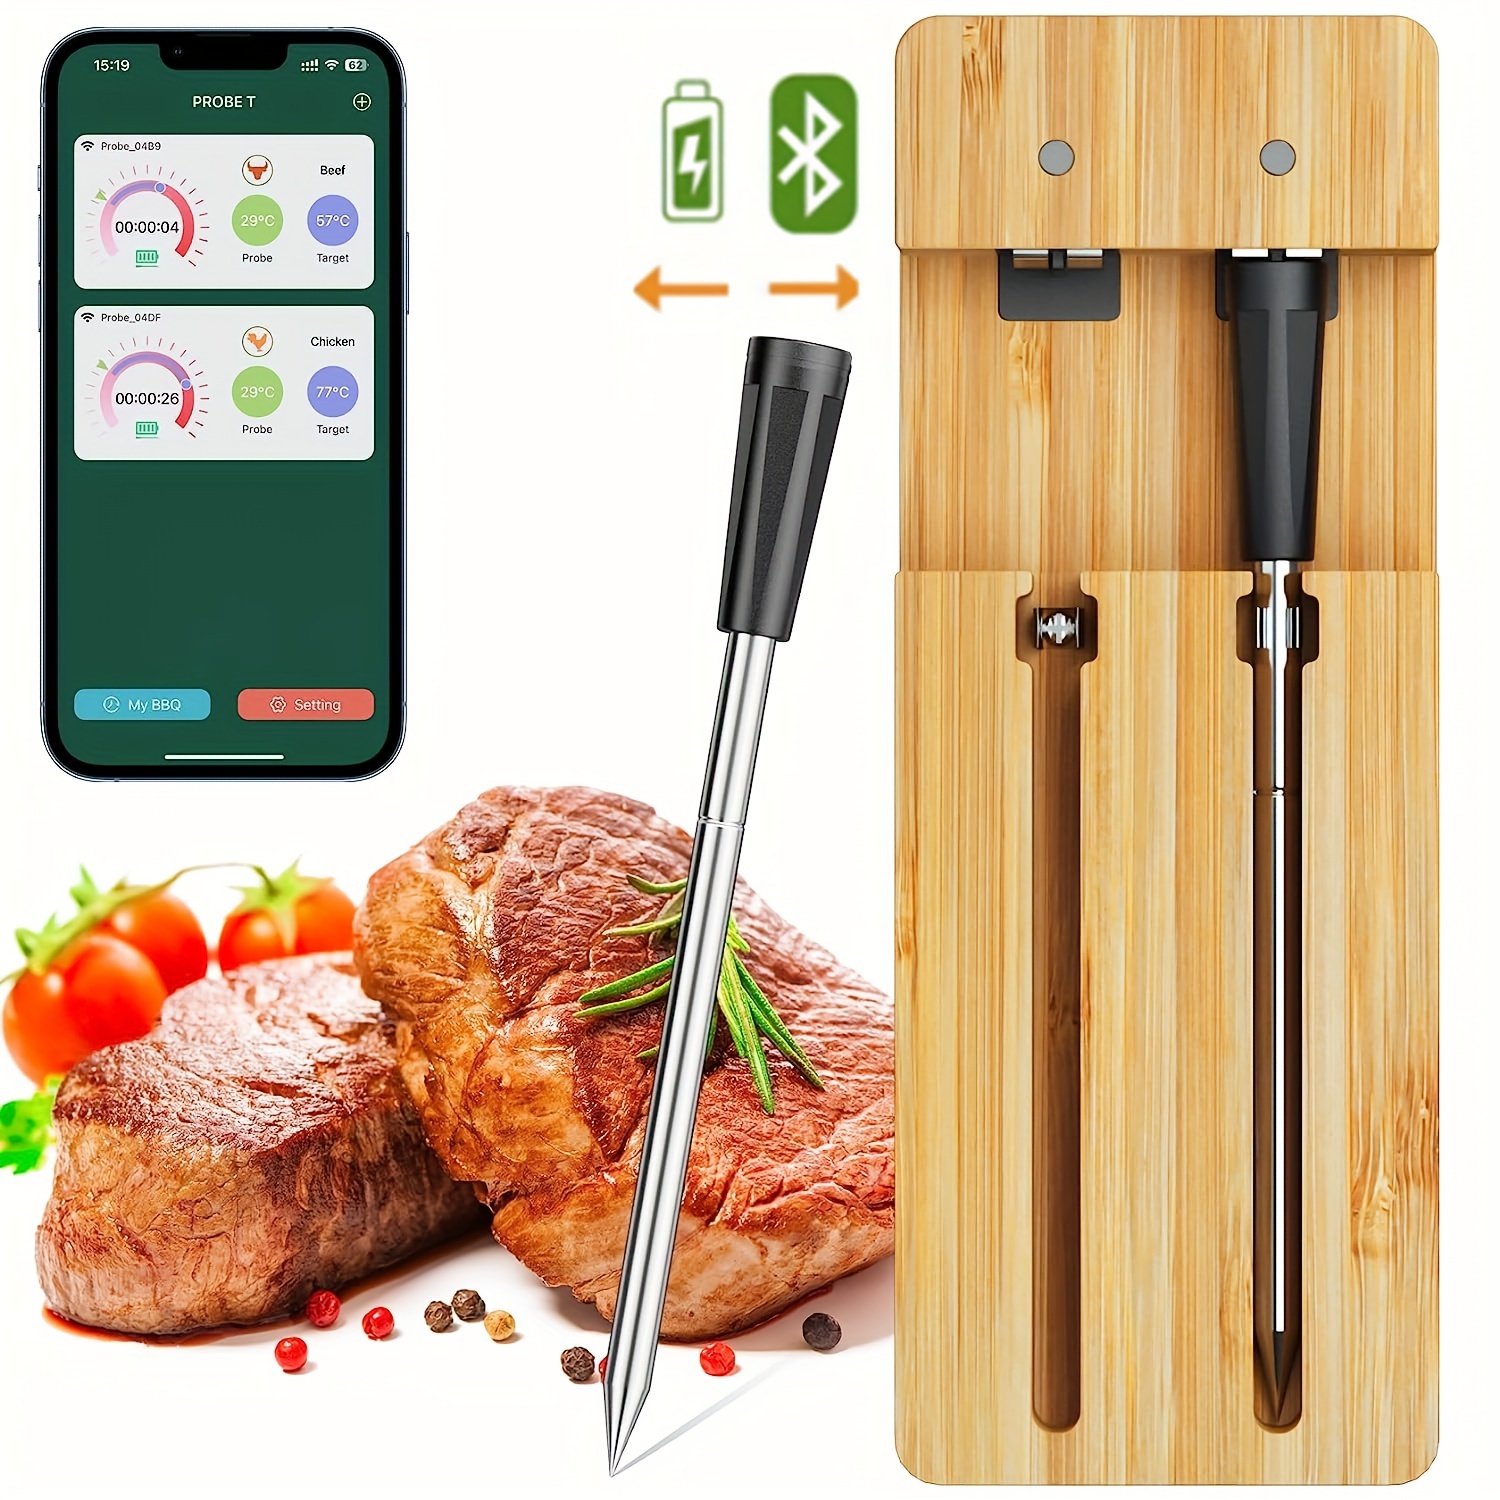 Wireless Smart Meat Thermometer for BBQ, Oven, Grill, Kitchen, Smoker,  Rotisserie, Wireless 5.0 BT, 4 Probes, Timer Setting, Multi-Functional  Recipes